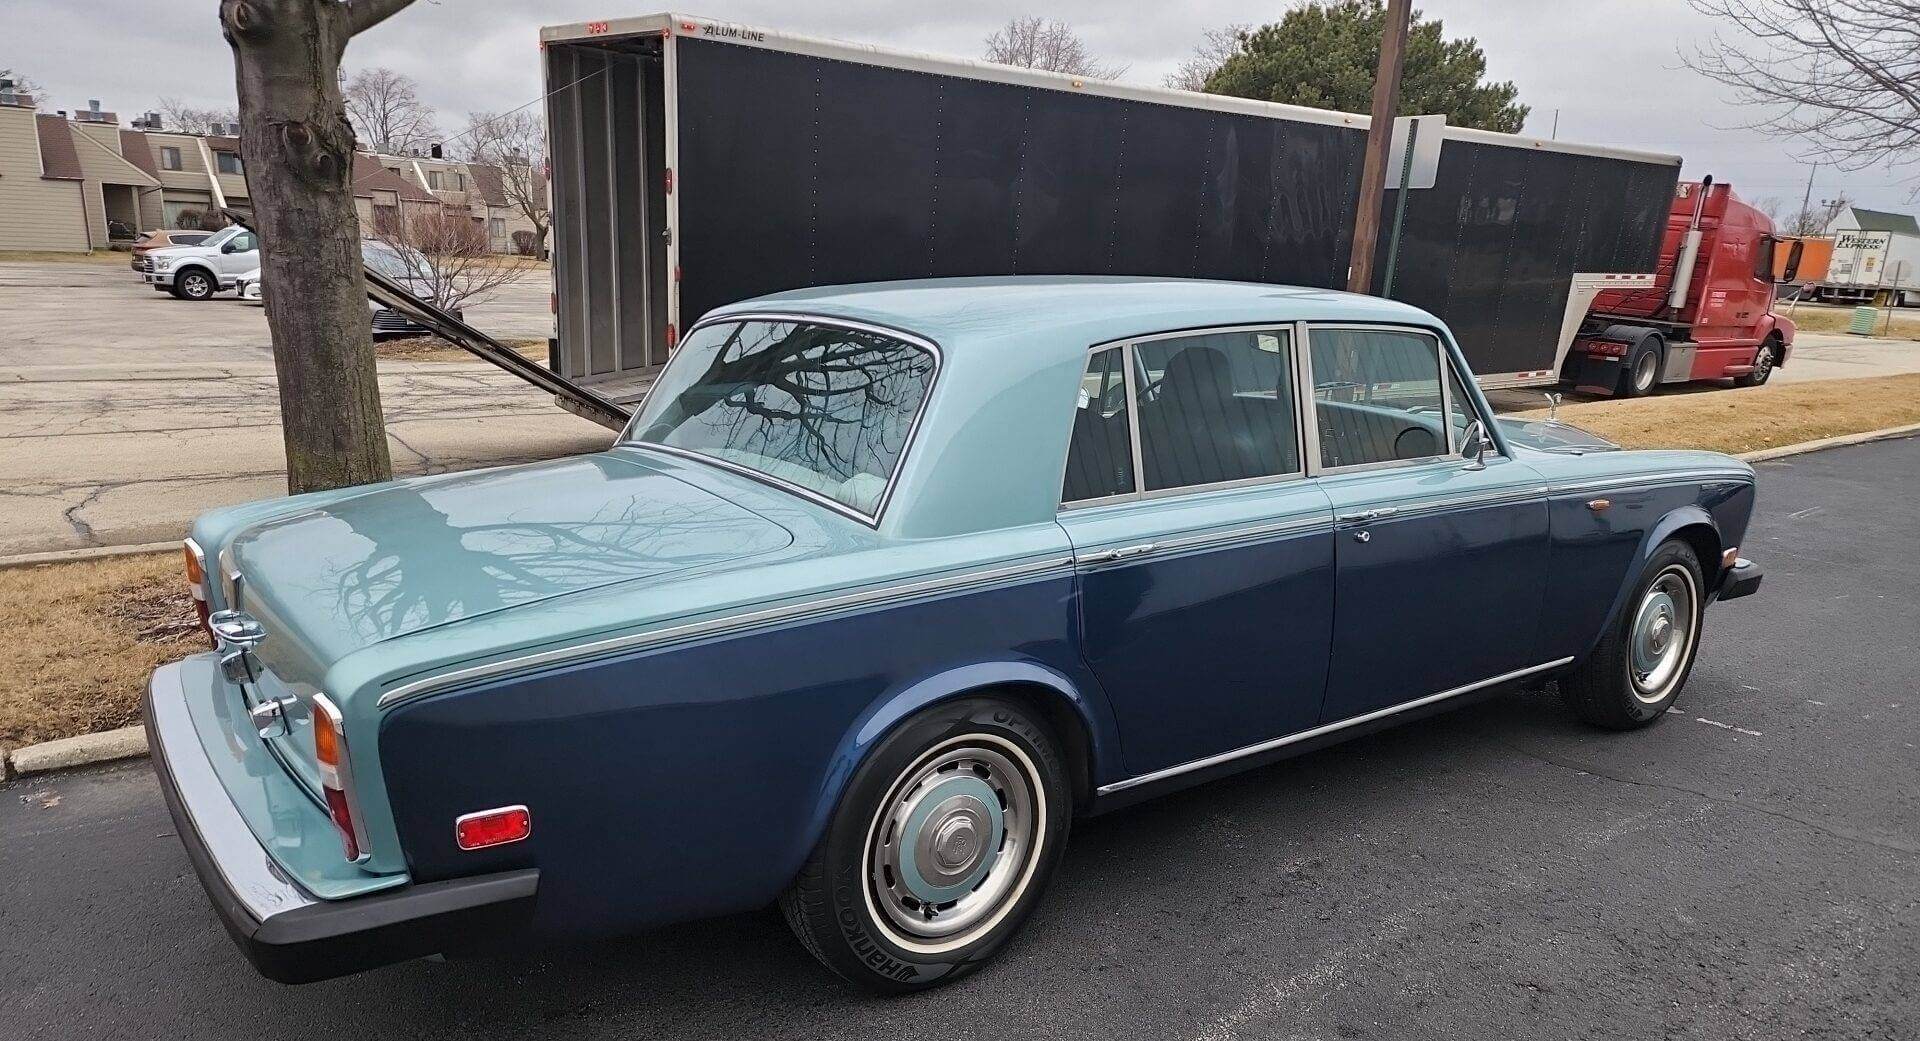 A classic Rolls Royce with an enclosed auto transport trailer behind it. Getting cars shipped is a pretty straight forward service.